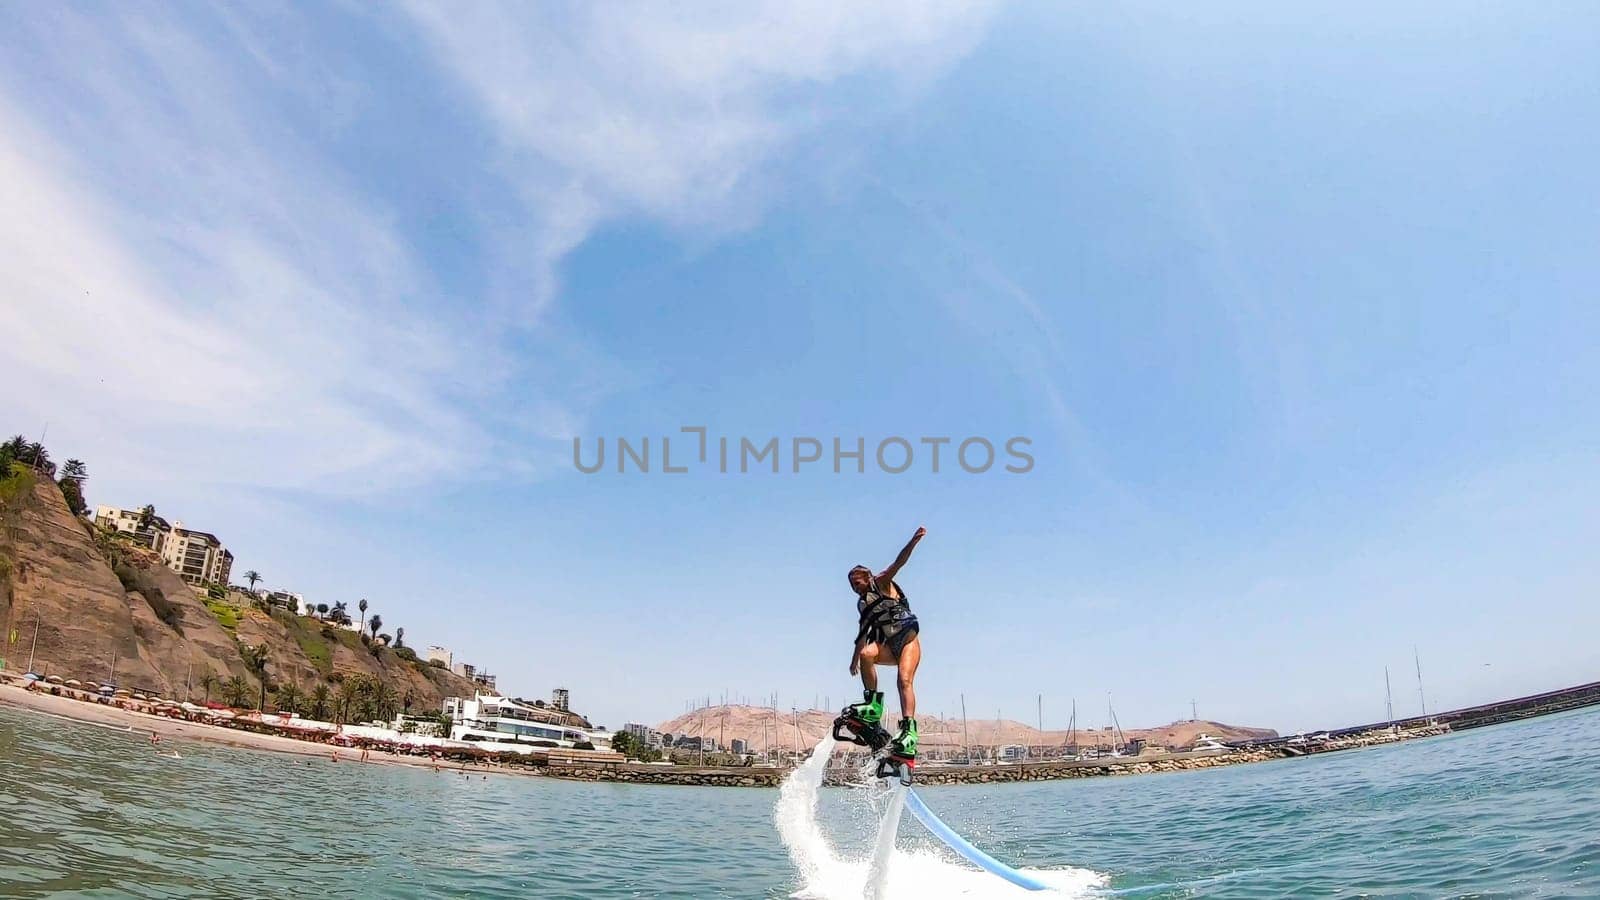 Exhilarating shot of a person flyboarding above the sea with a coastal cityscape backdrop